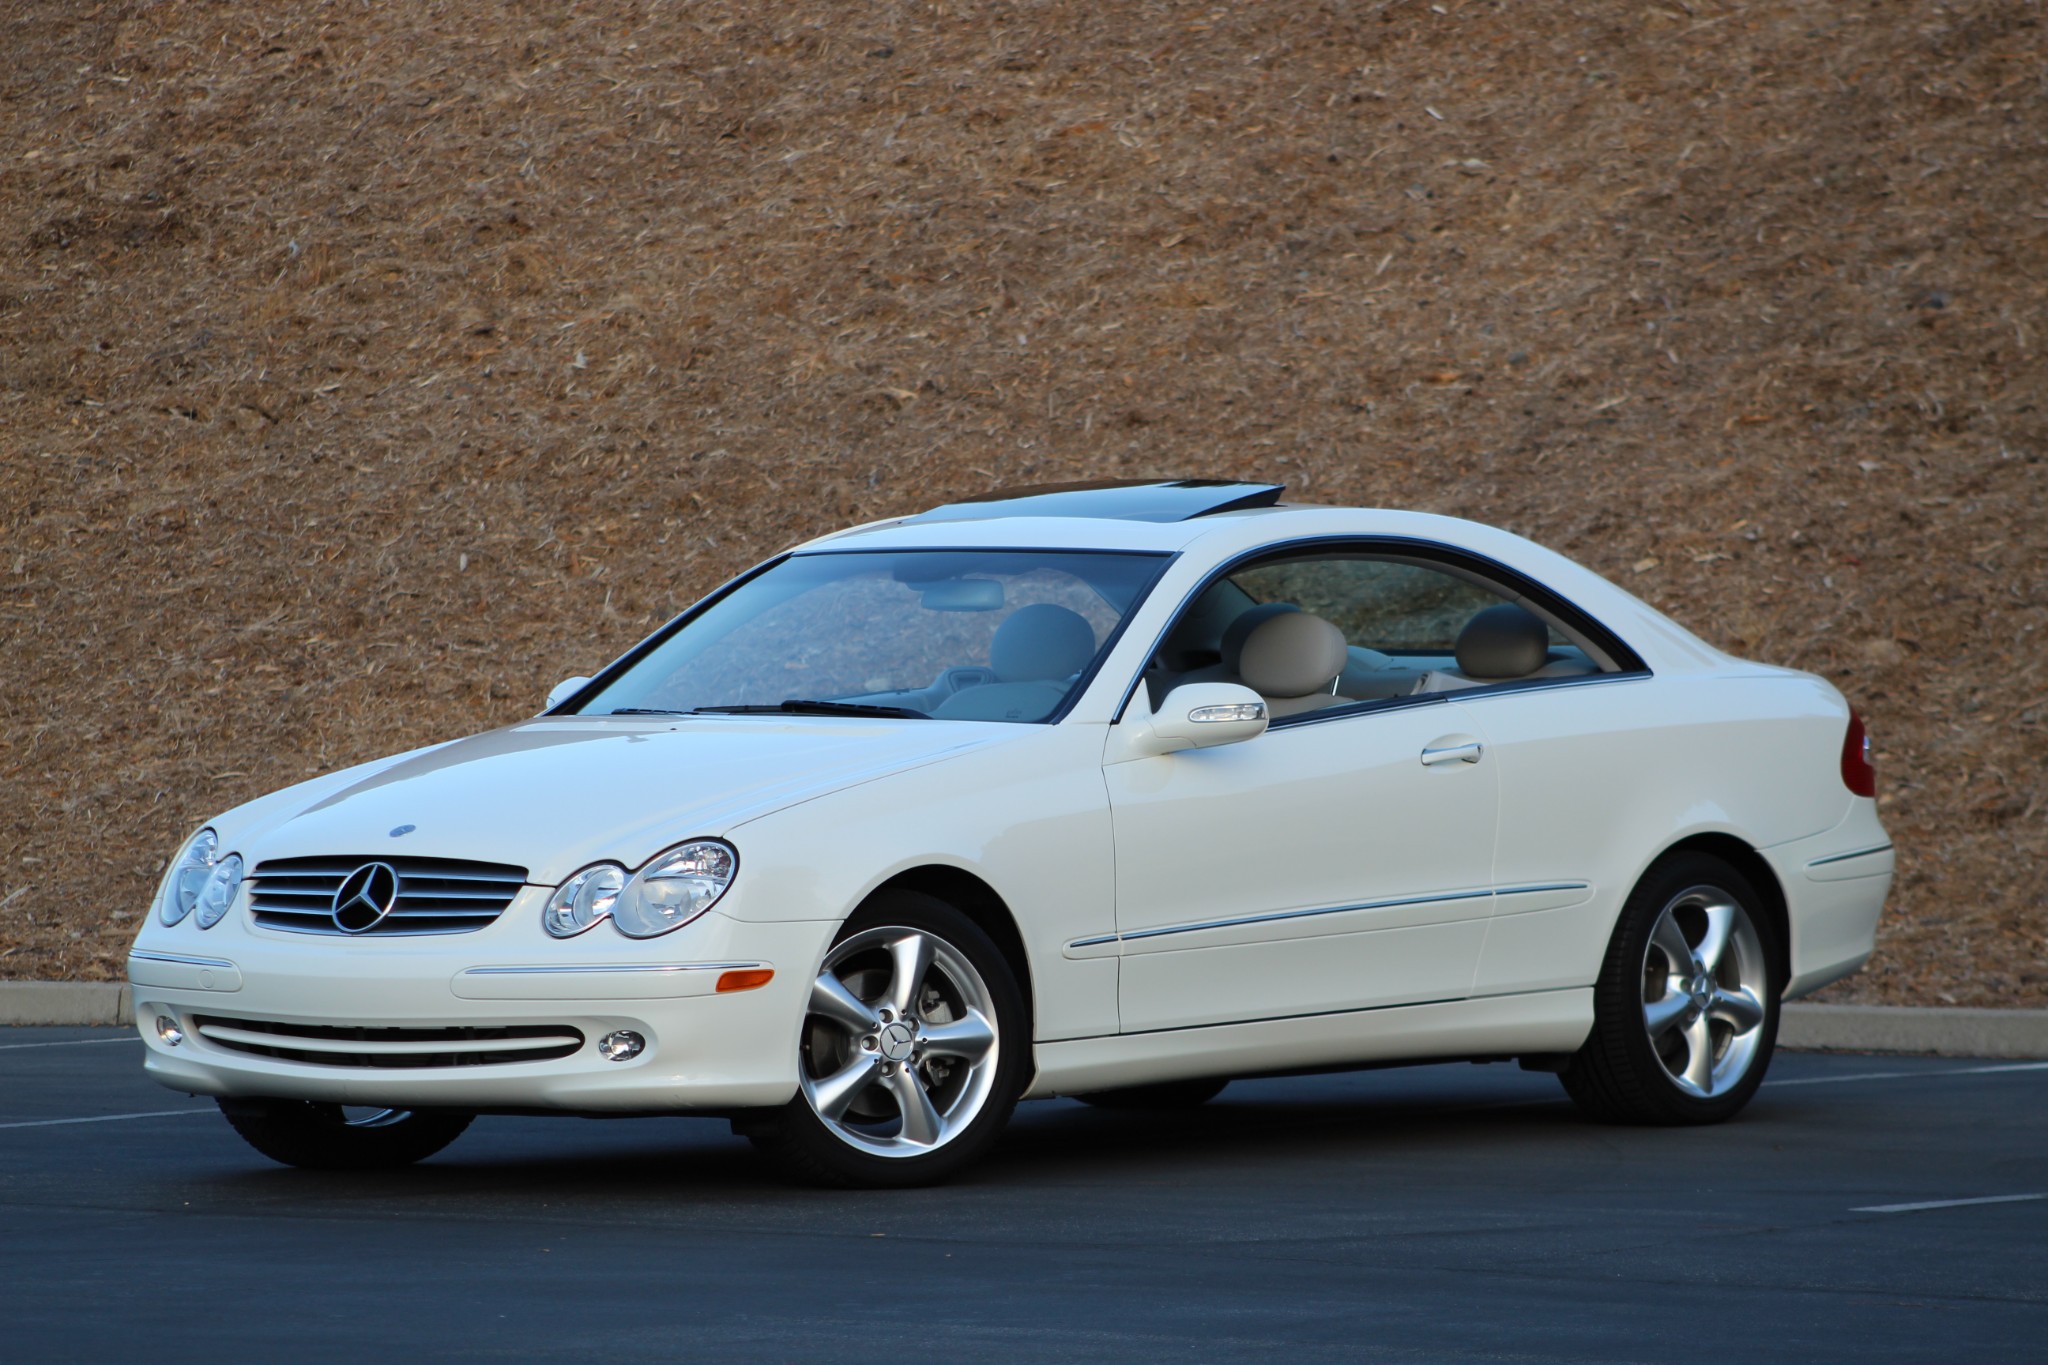 No Reserve: 5k-Mile 2005 Mercedes-Benz CLK 320 for sale on BaT Auctions -  sold for $16,500 on August 14, 2018 (Lot #11,616) | Bring a Trailer